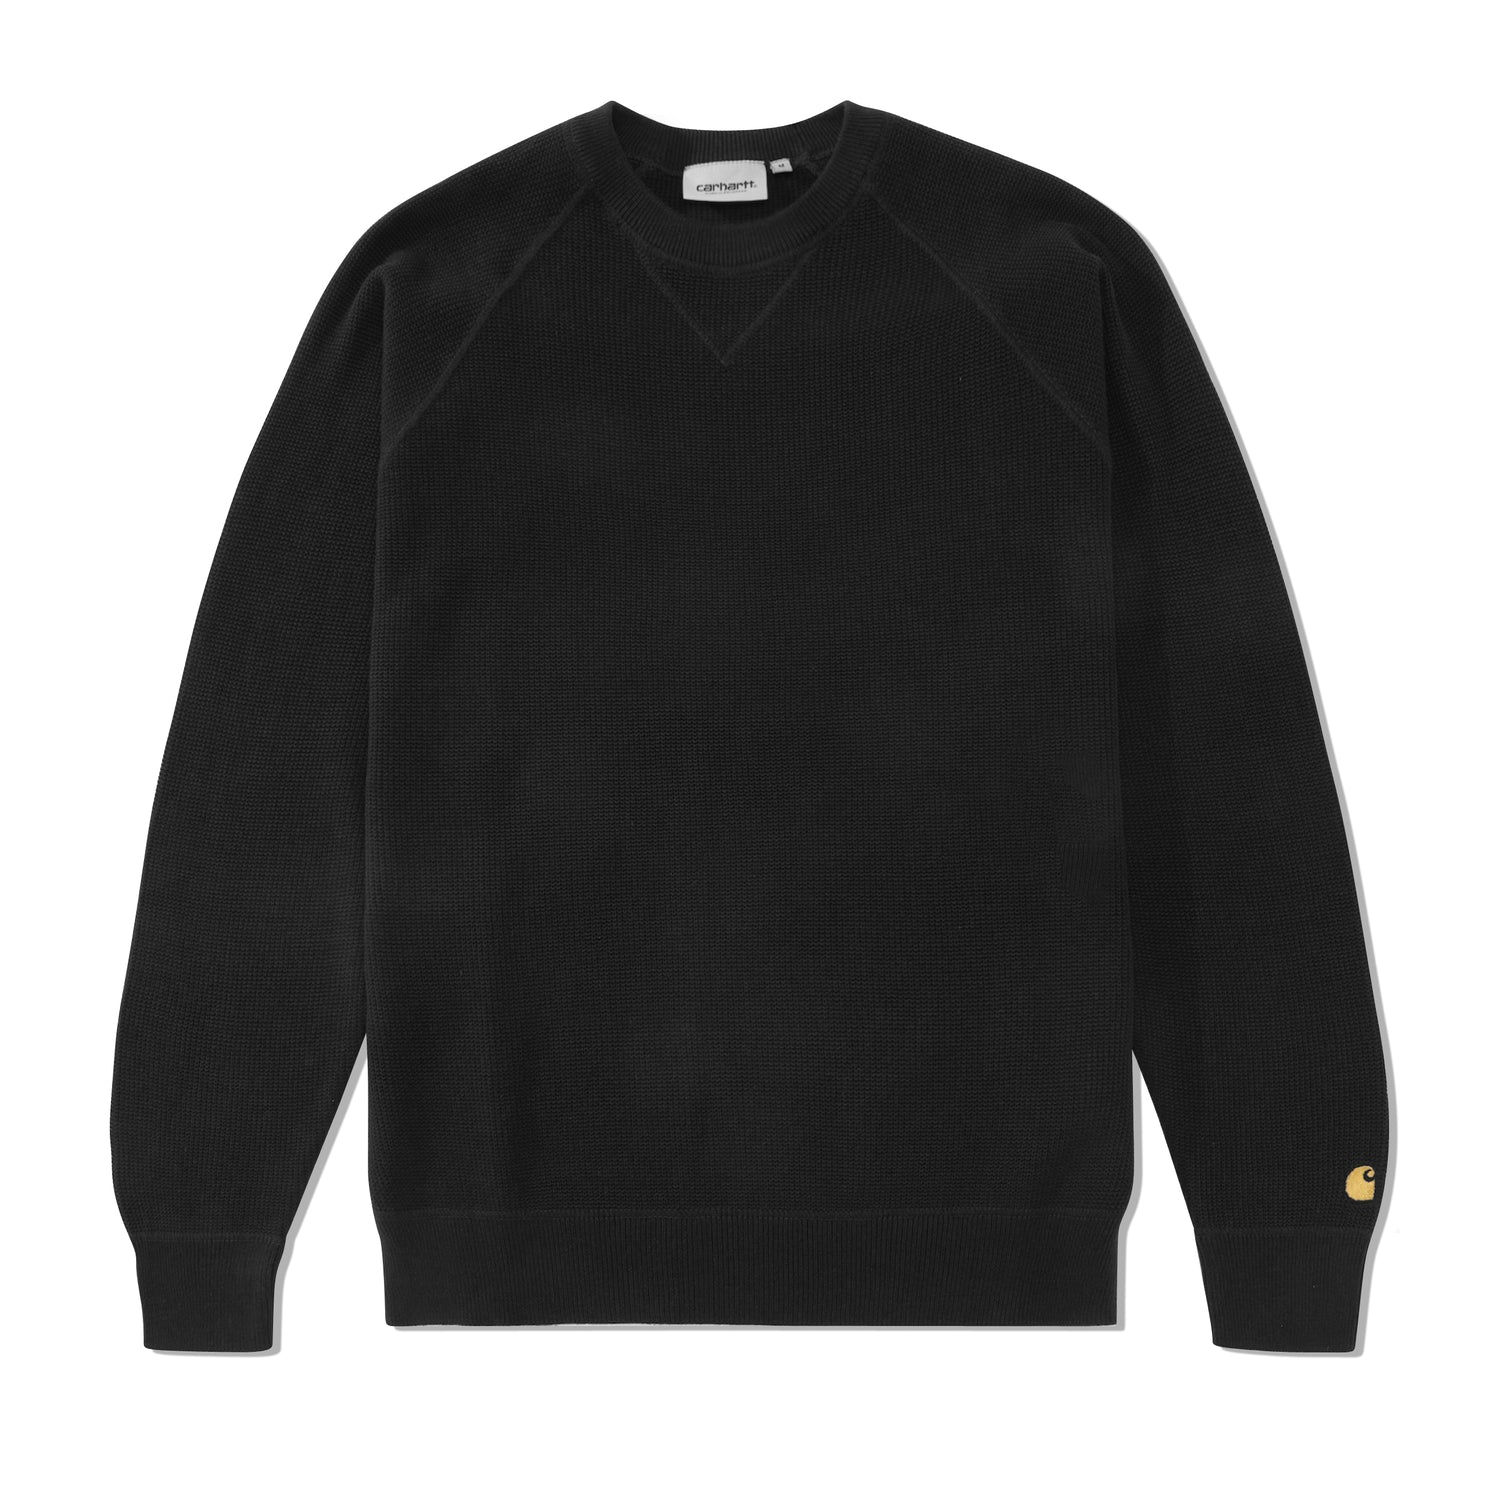 Chase Sweater, Black / Gold